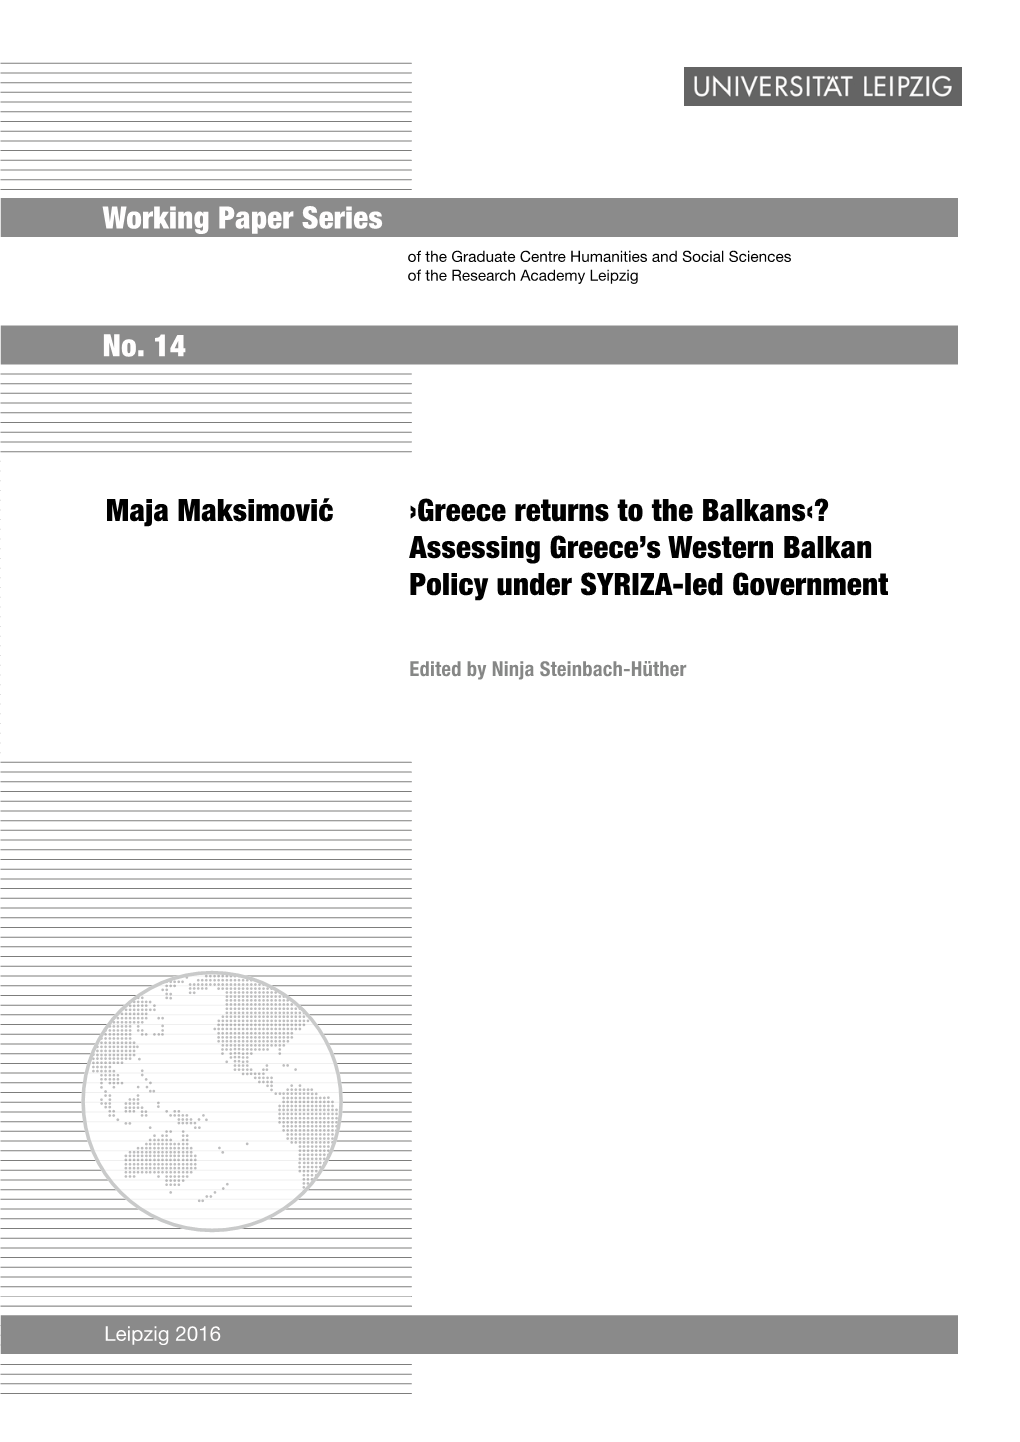 Working Paper Series ›Greece Returns to the Balkans‹? Assessing